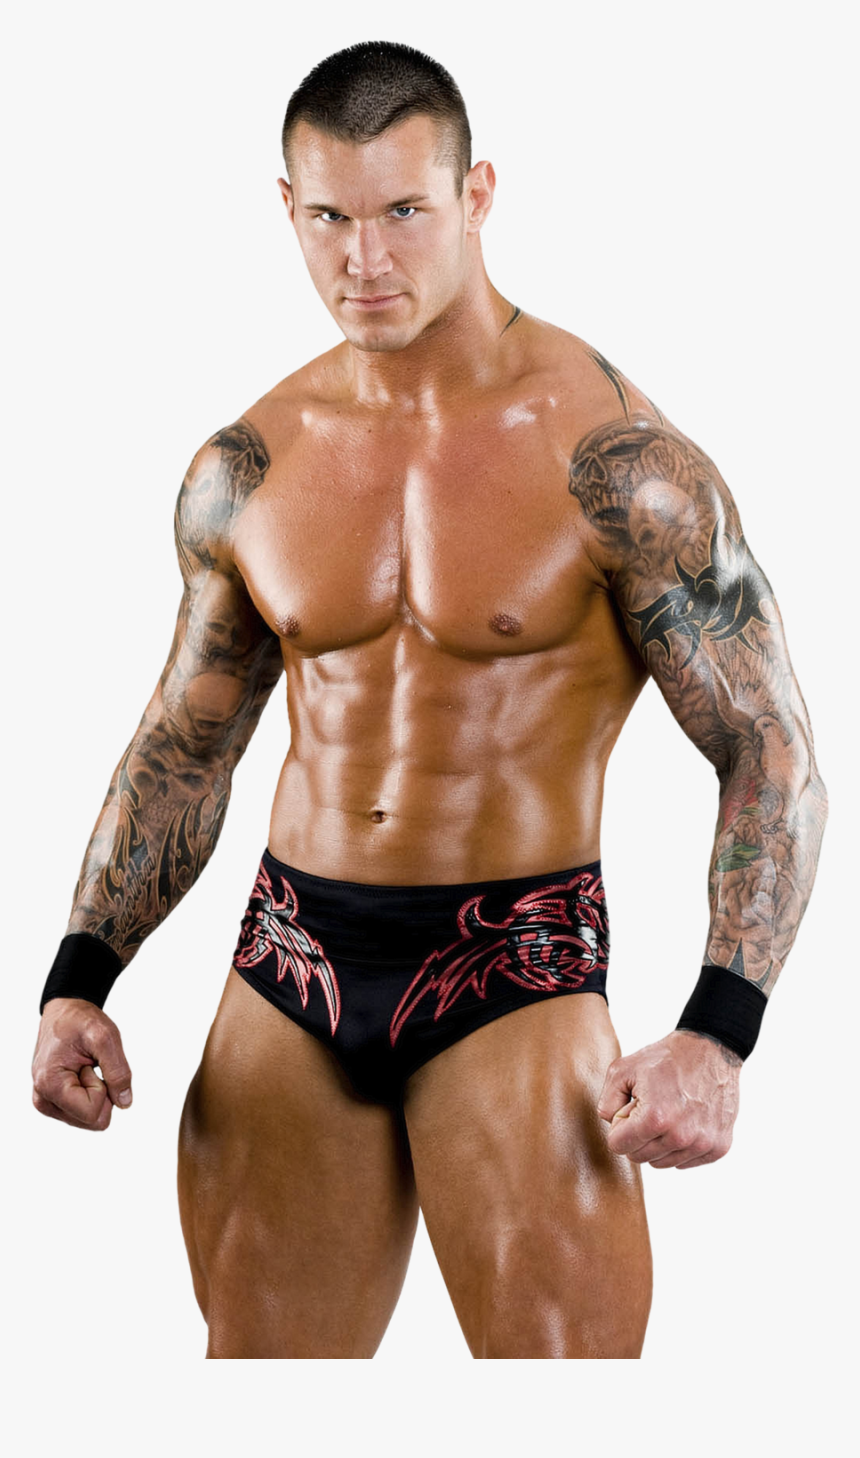 Randy Orton stares down the camera with black trunks on.